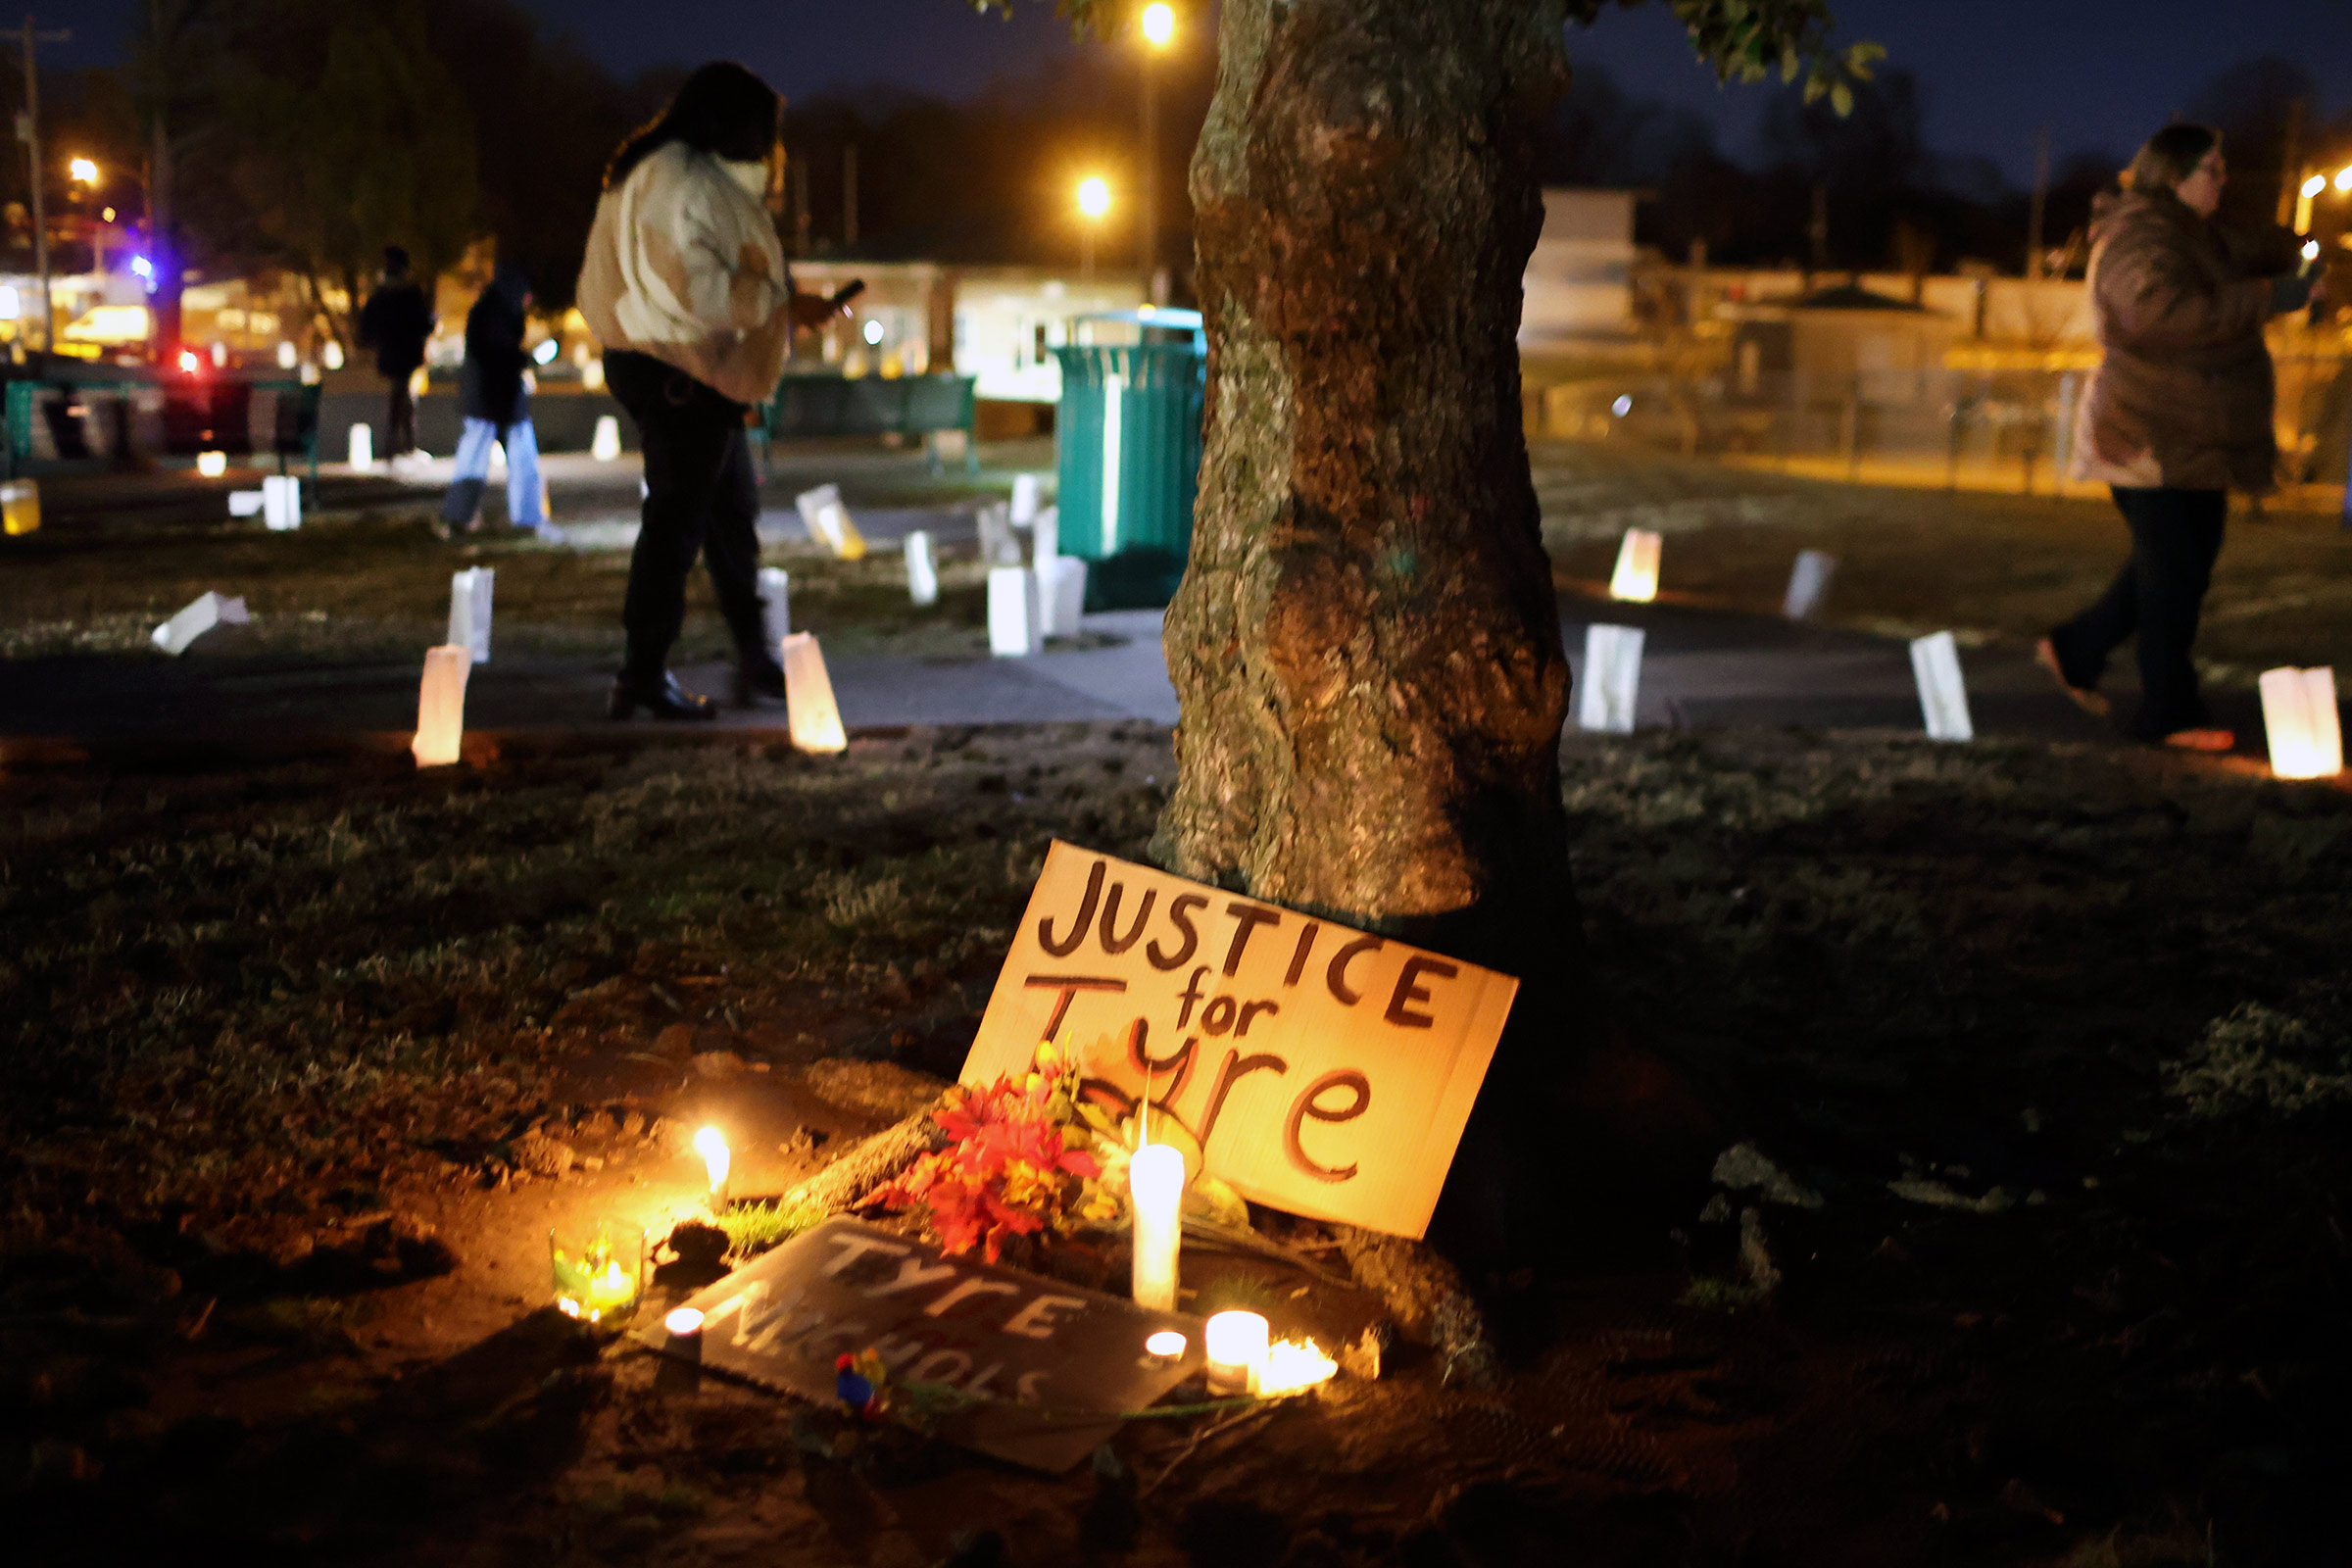 People attend a candlelight vigil in memory of Tyre Nichols at the Tobey Skate Park on January 26, 2023 in Memphis, Tennessee. (Scott Olson—Getty Images)